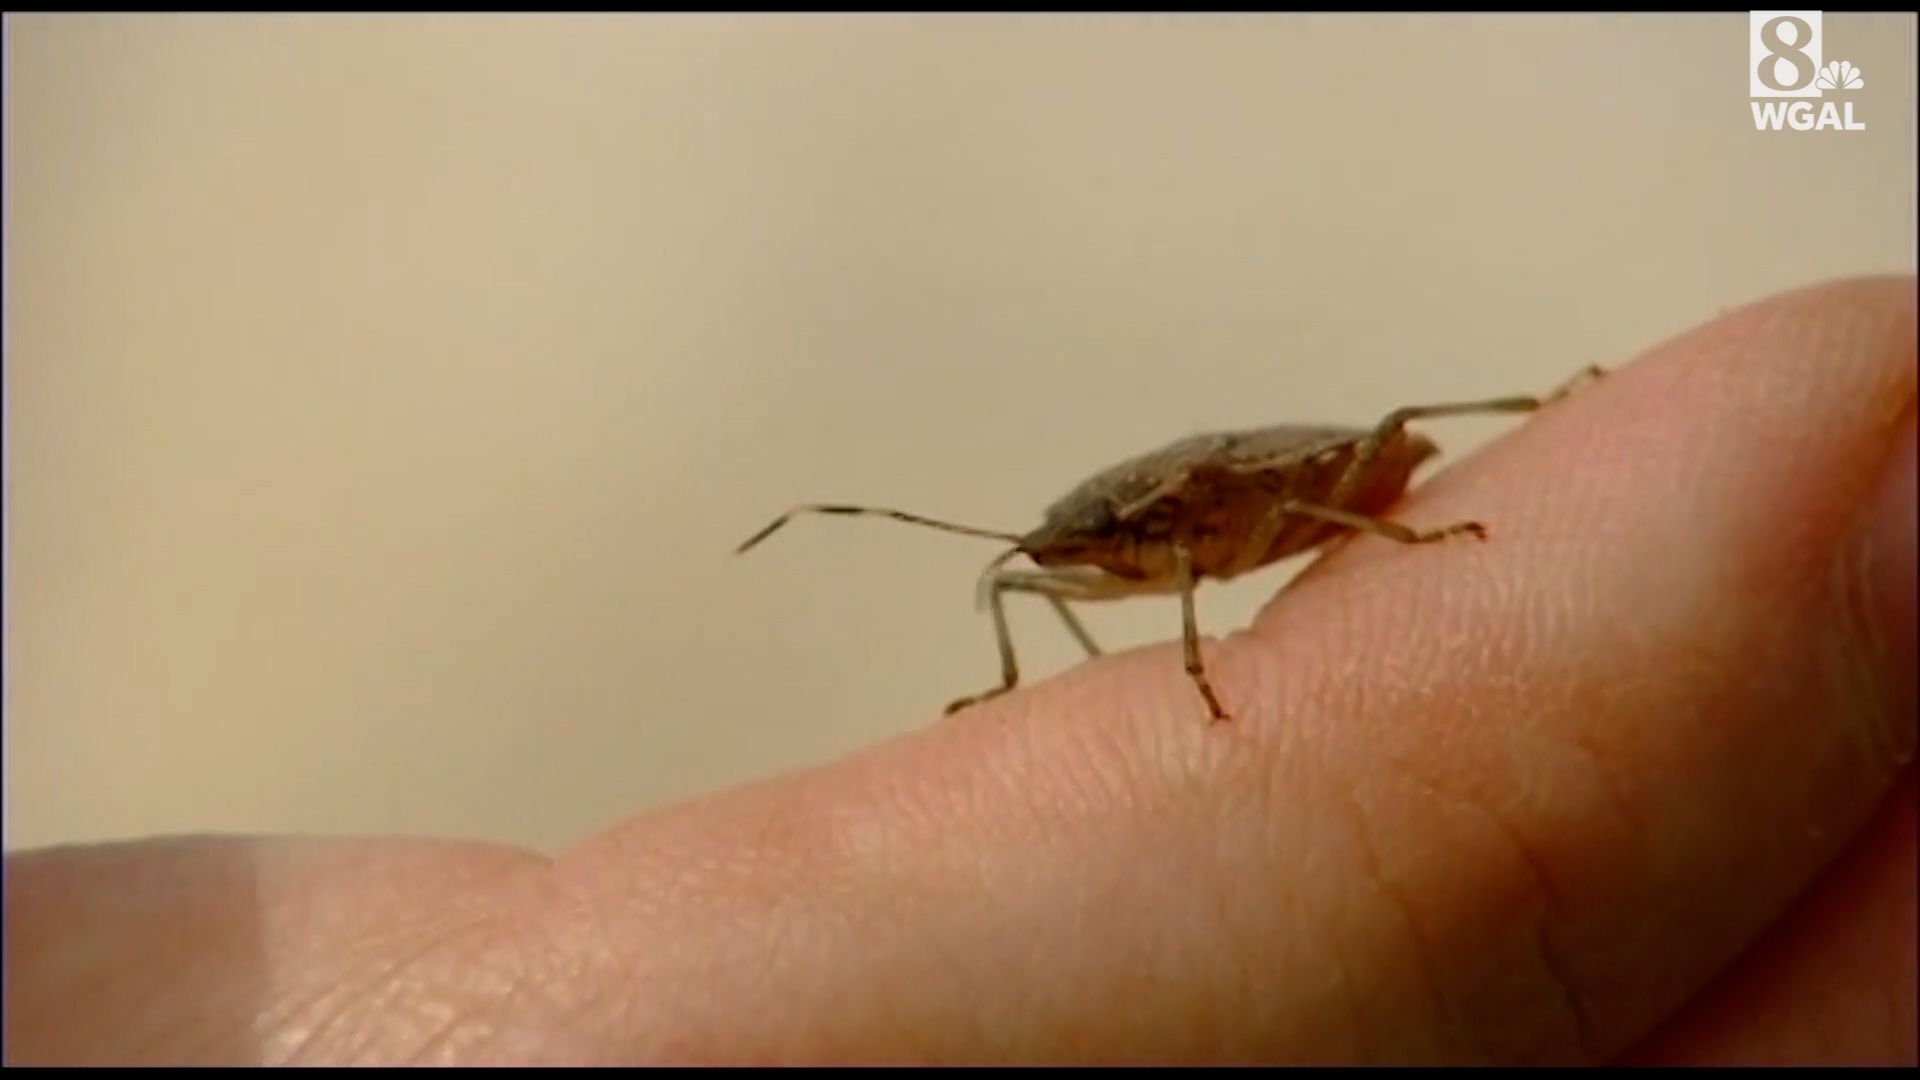 Stinkbugs: Tips for keeping them out of the house – The Morning Call